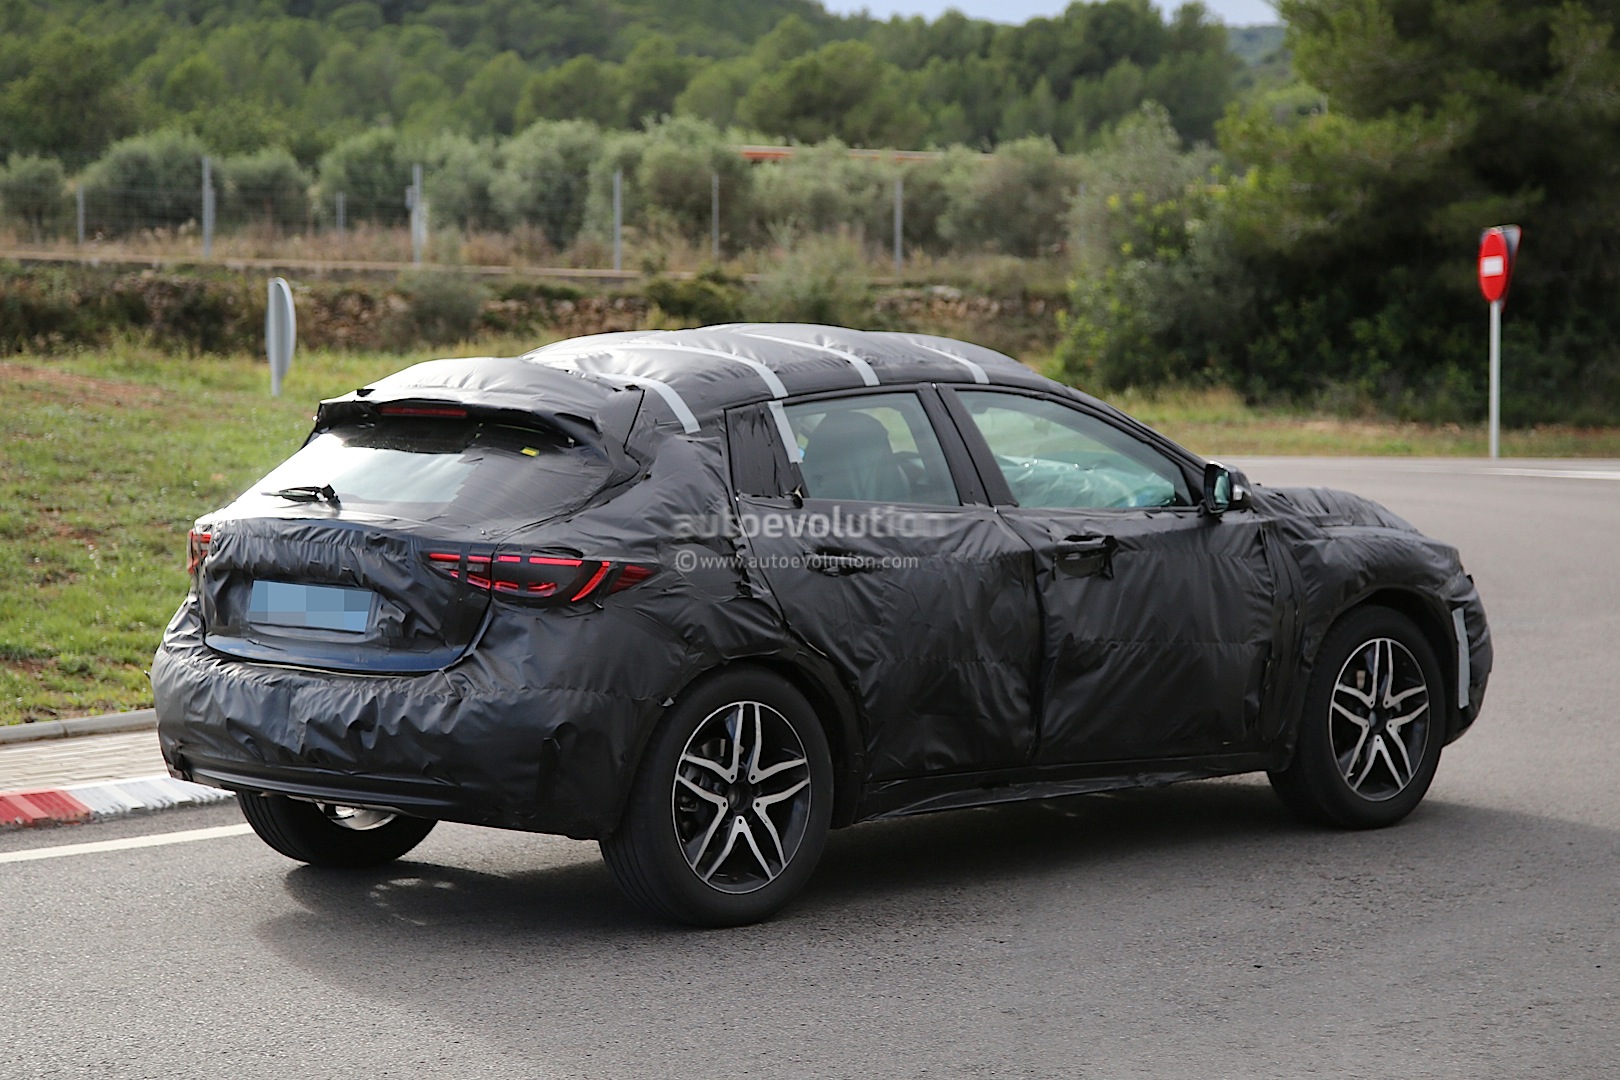 2015 - [Infiniti] Q30/QX30 - Page 2 Infiniti-qx30-spied-for-the-first-time-will-enter-production-in-2015-photo-gallery_8